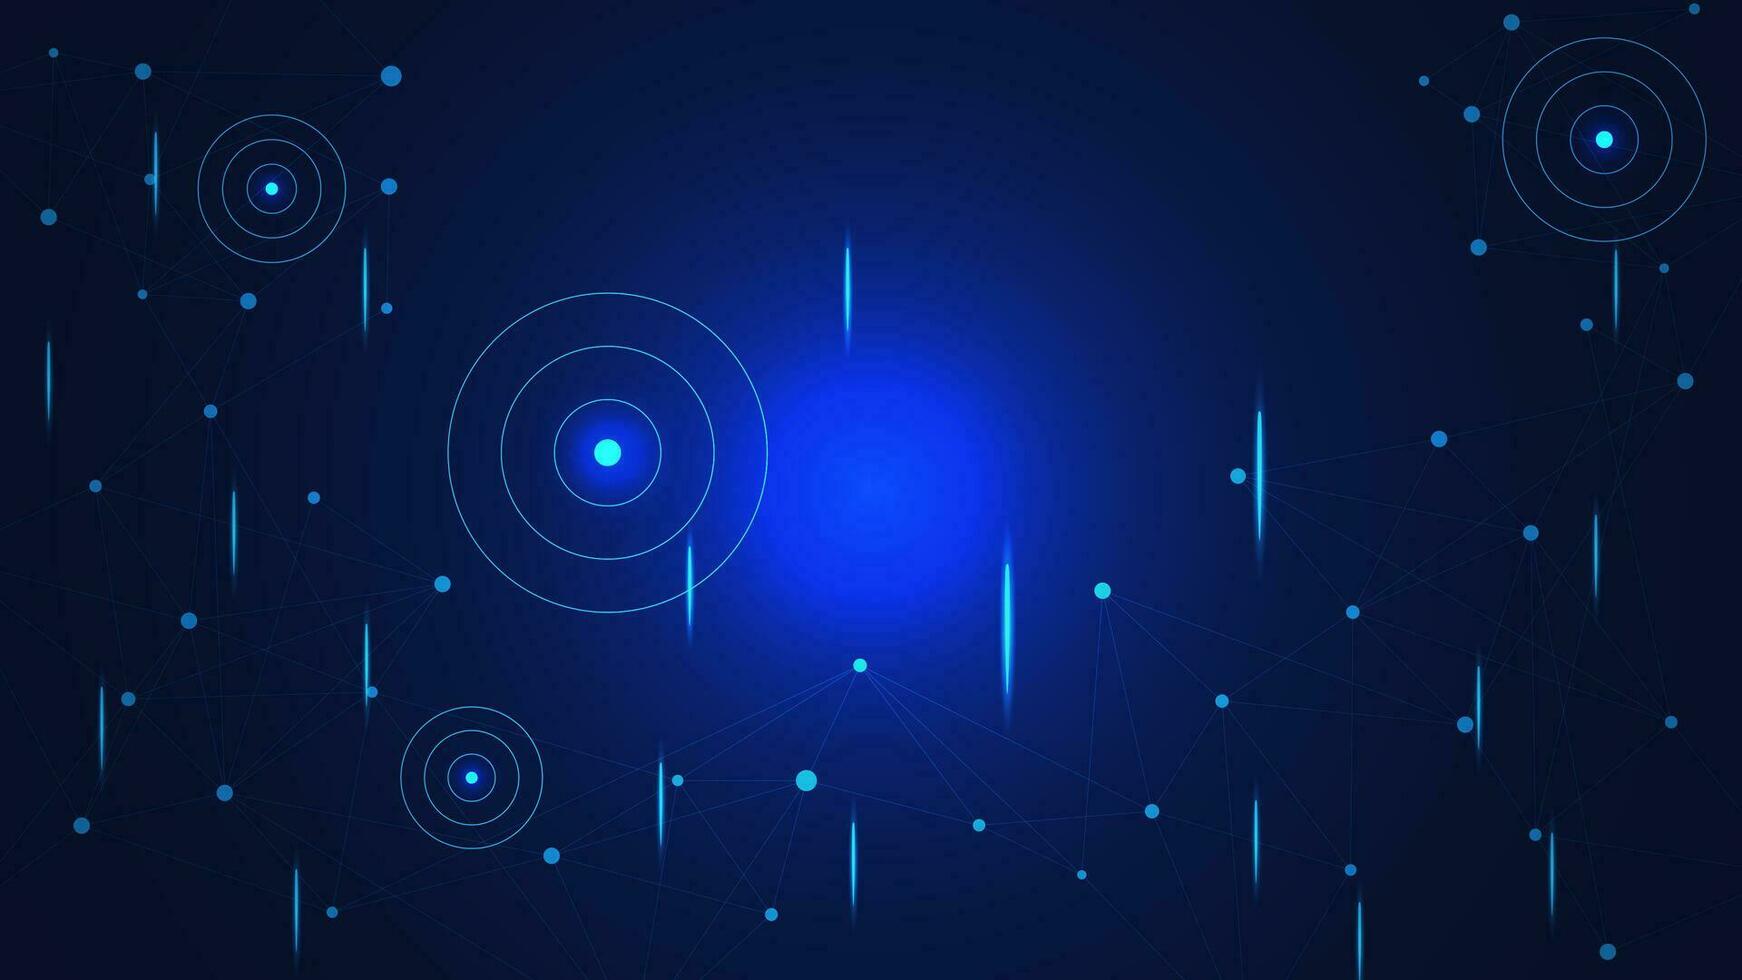 Abstract digital communication technology concept with connecting dots and lines background. Vector illustration.